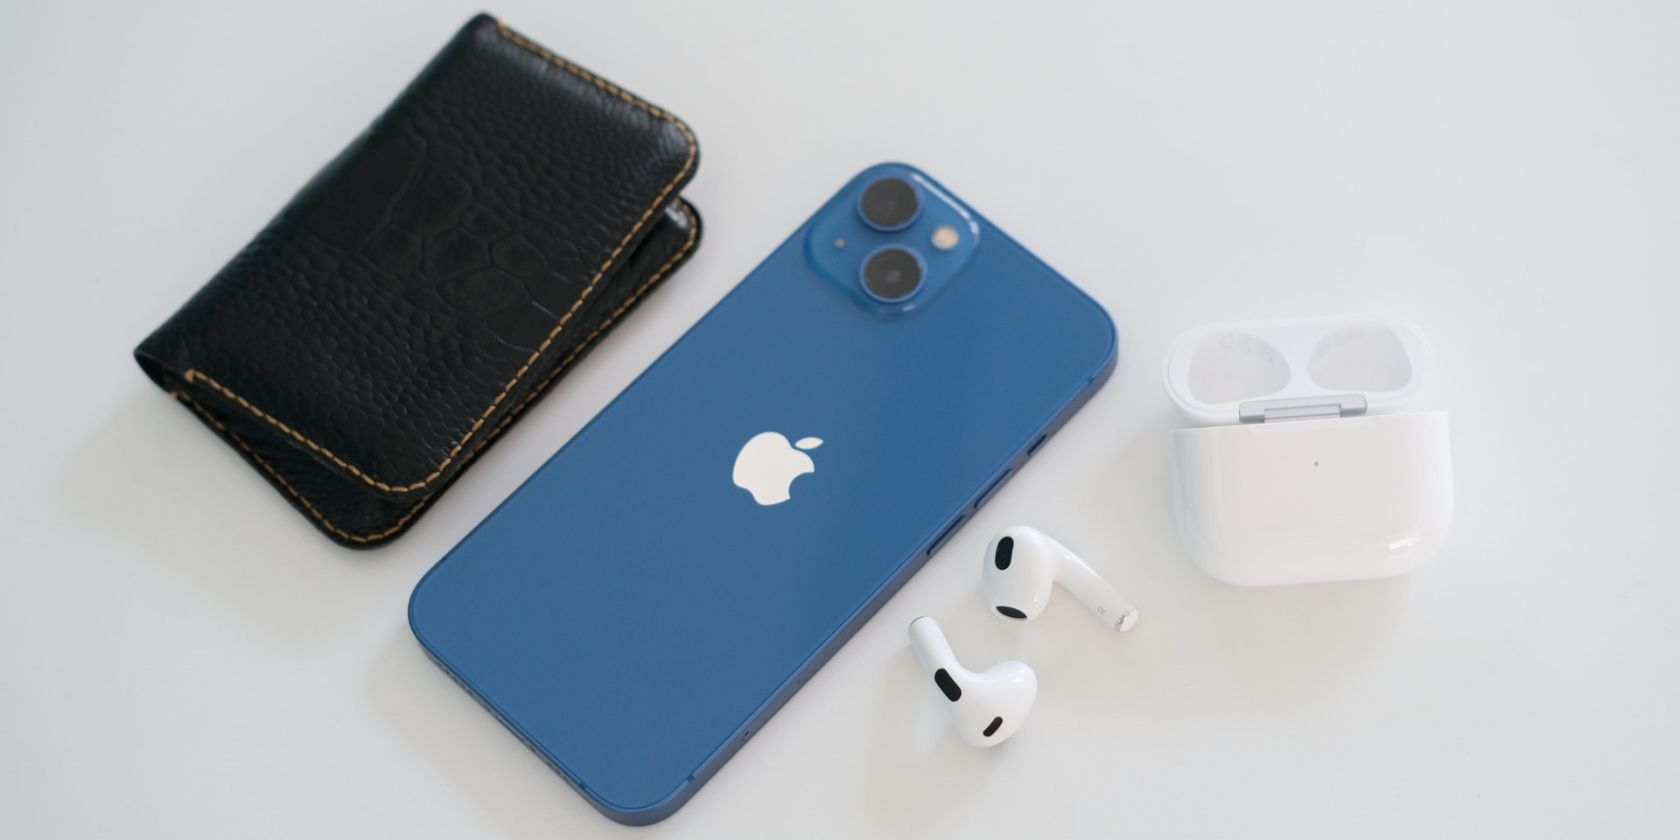 iPhone 13 next to a wallet and a pair of AirPods